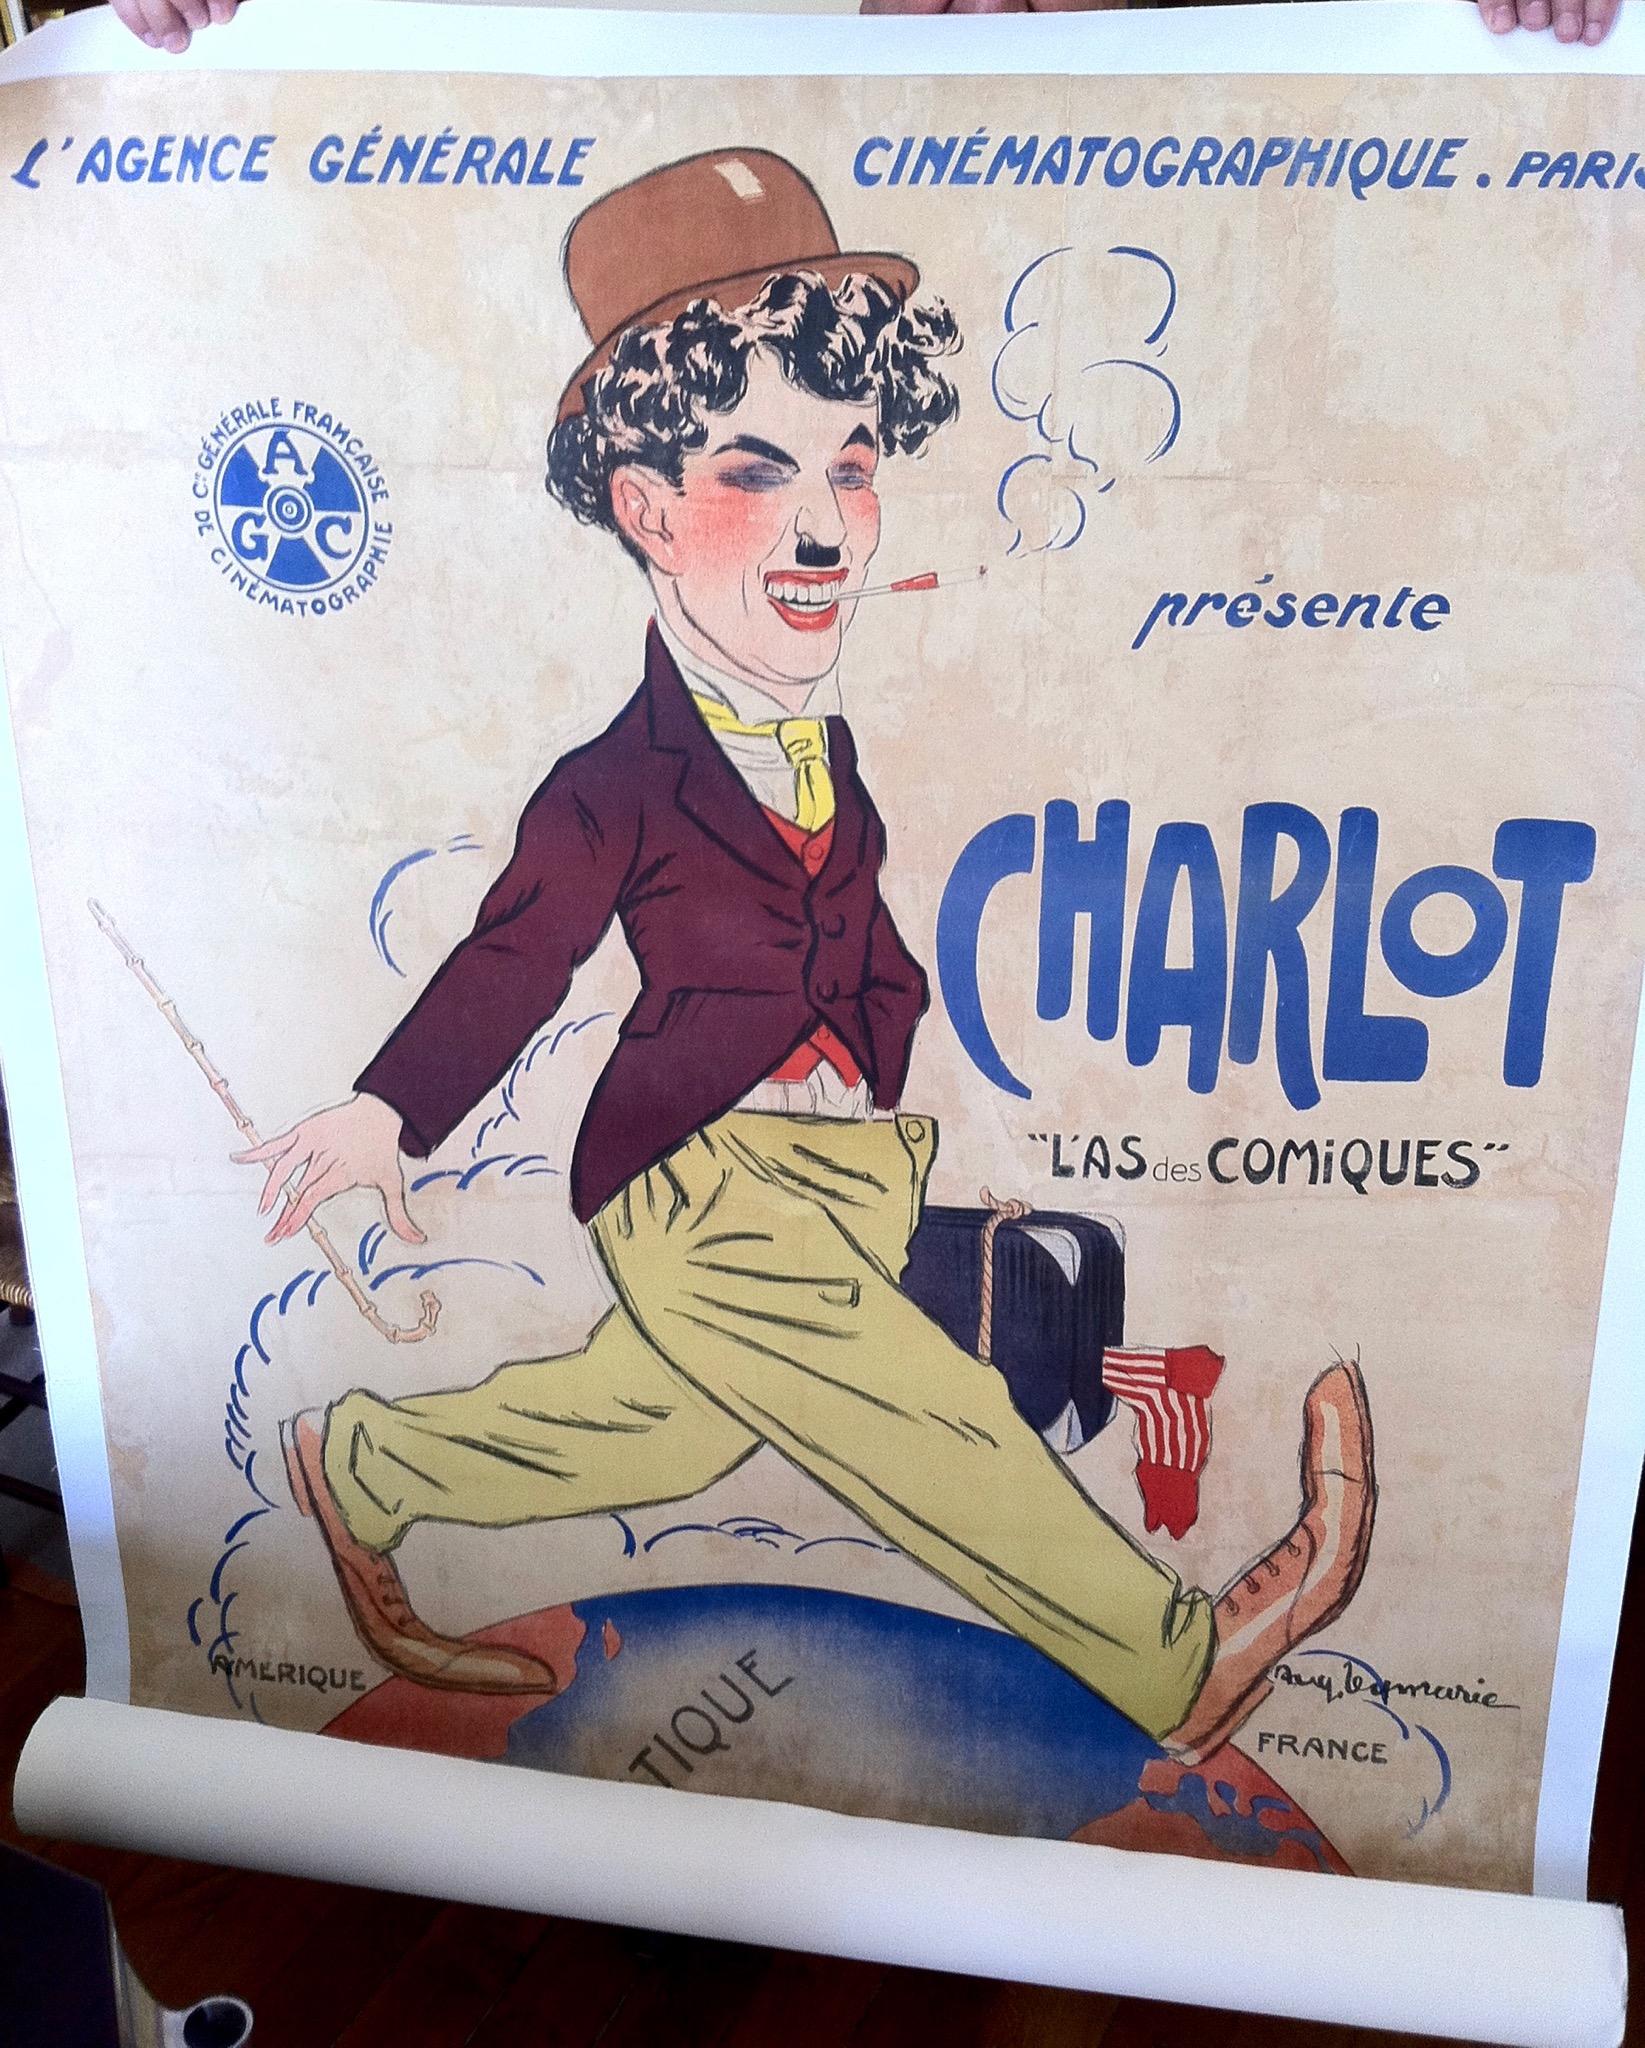 This collection was assembled in France over the course of 30 years by one passionate collector. It includes 4000 French movie posters, some ancient French advertising posters and some cinema memorabilia. There is a detailed list of every poster and